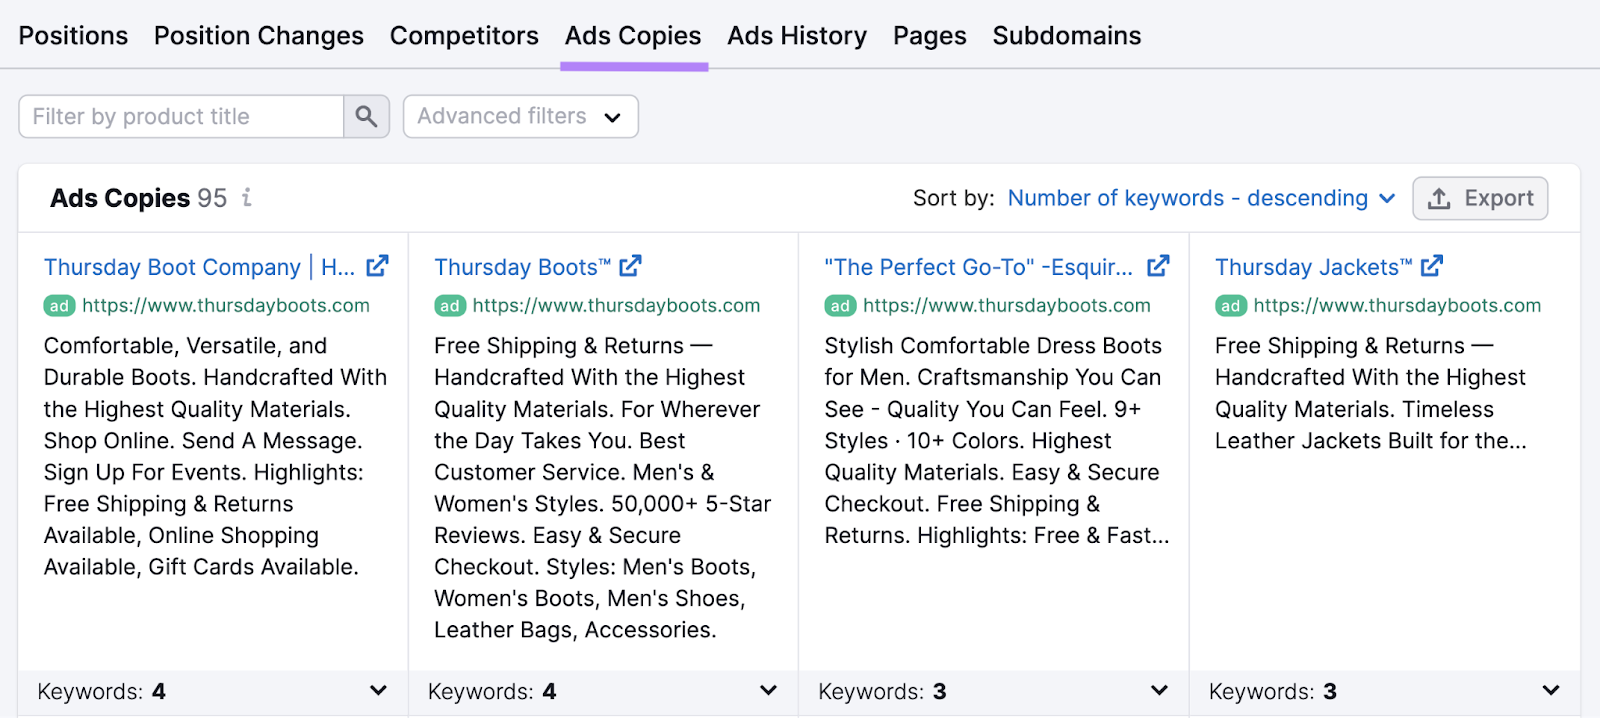 competitors' ads copies shown successful  Advertising Research tool